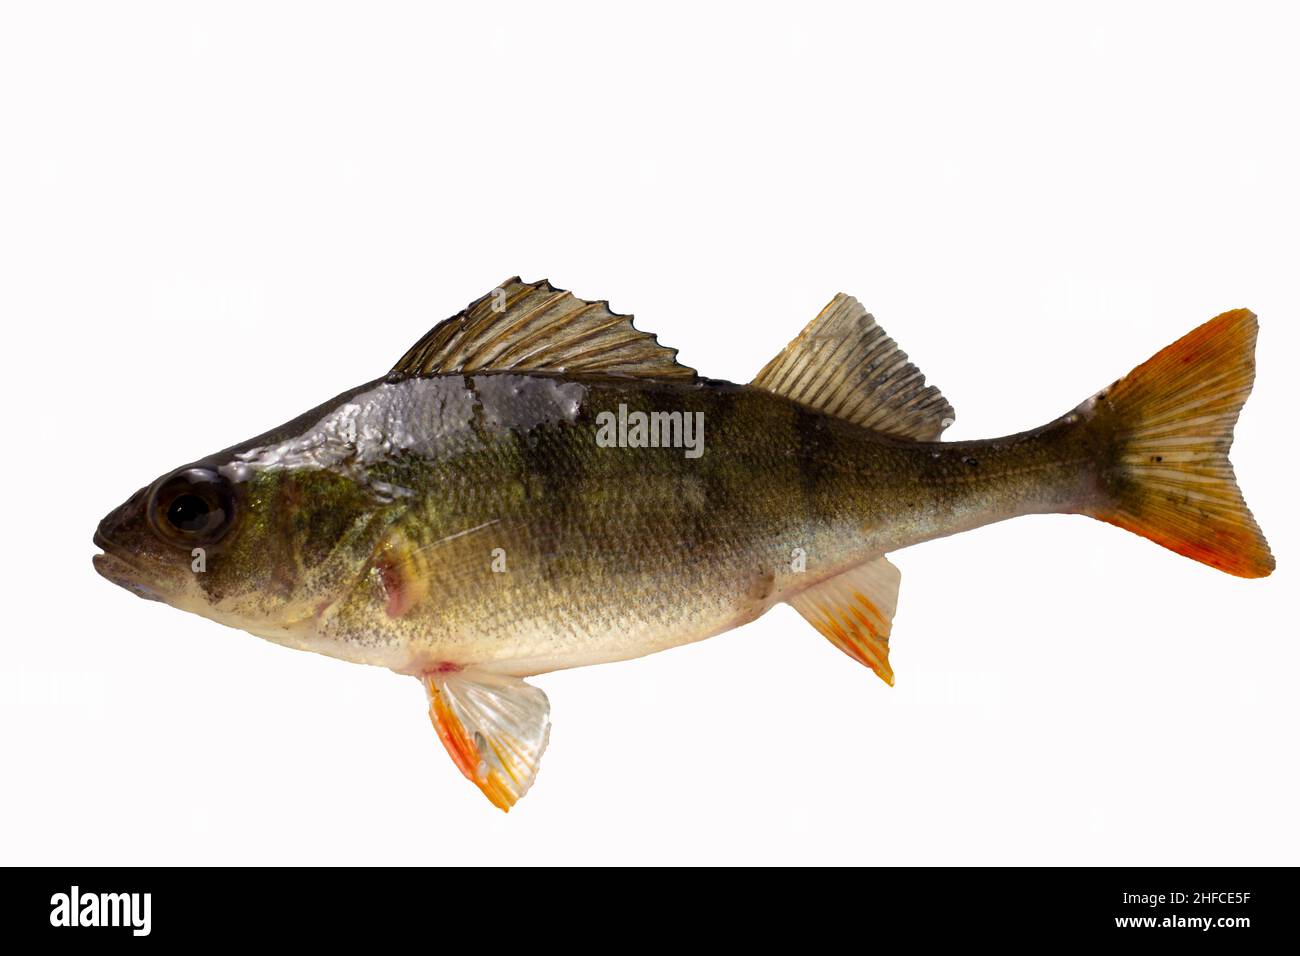 Perch fish isolated on white. Stock Photo